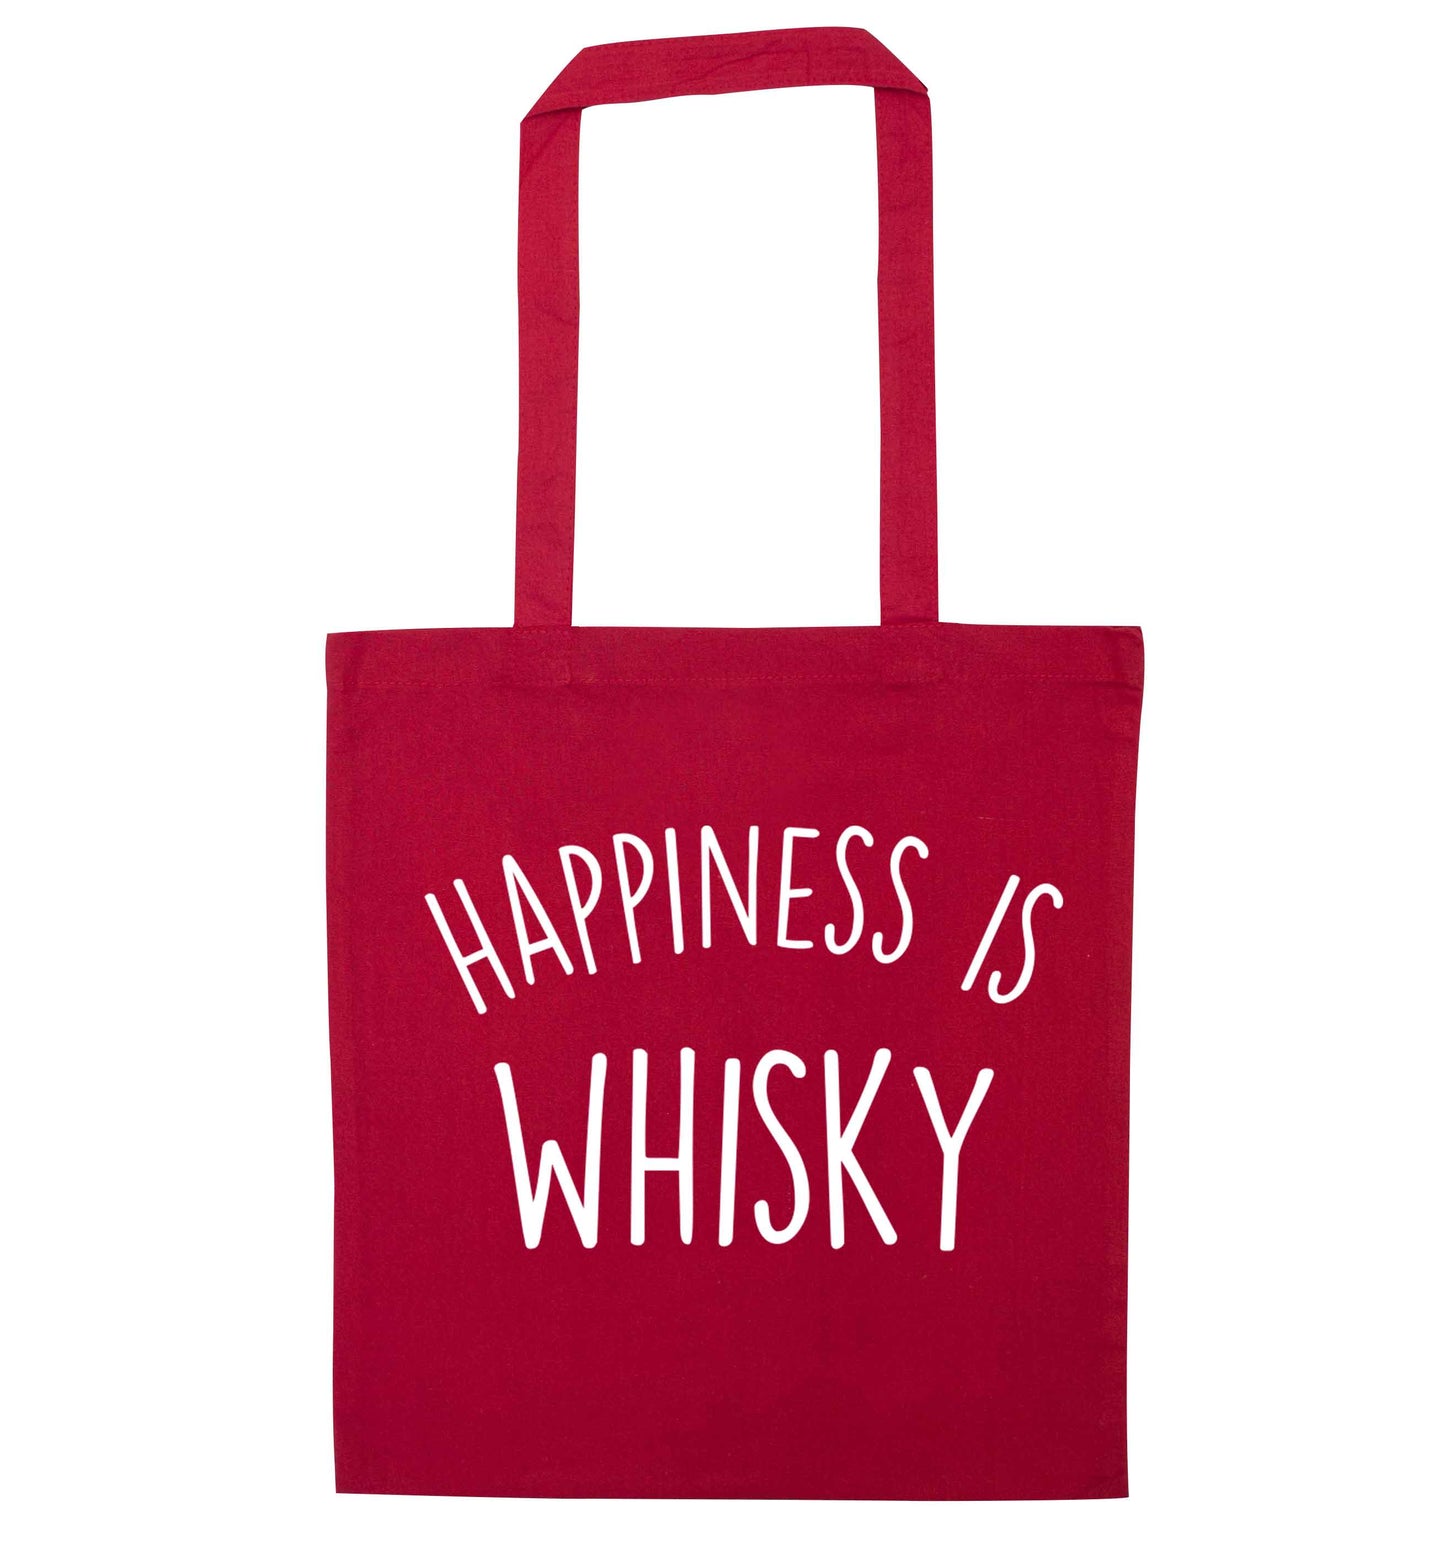 Happiness is whisky red tote bag